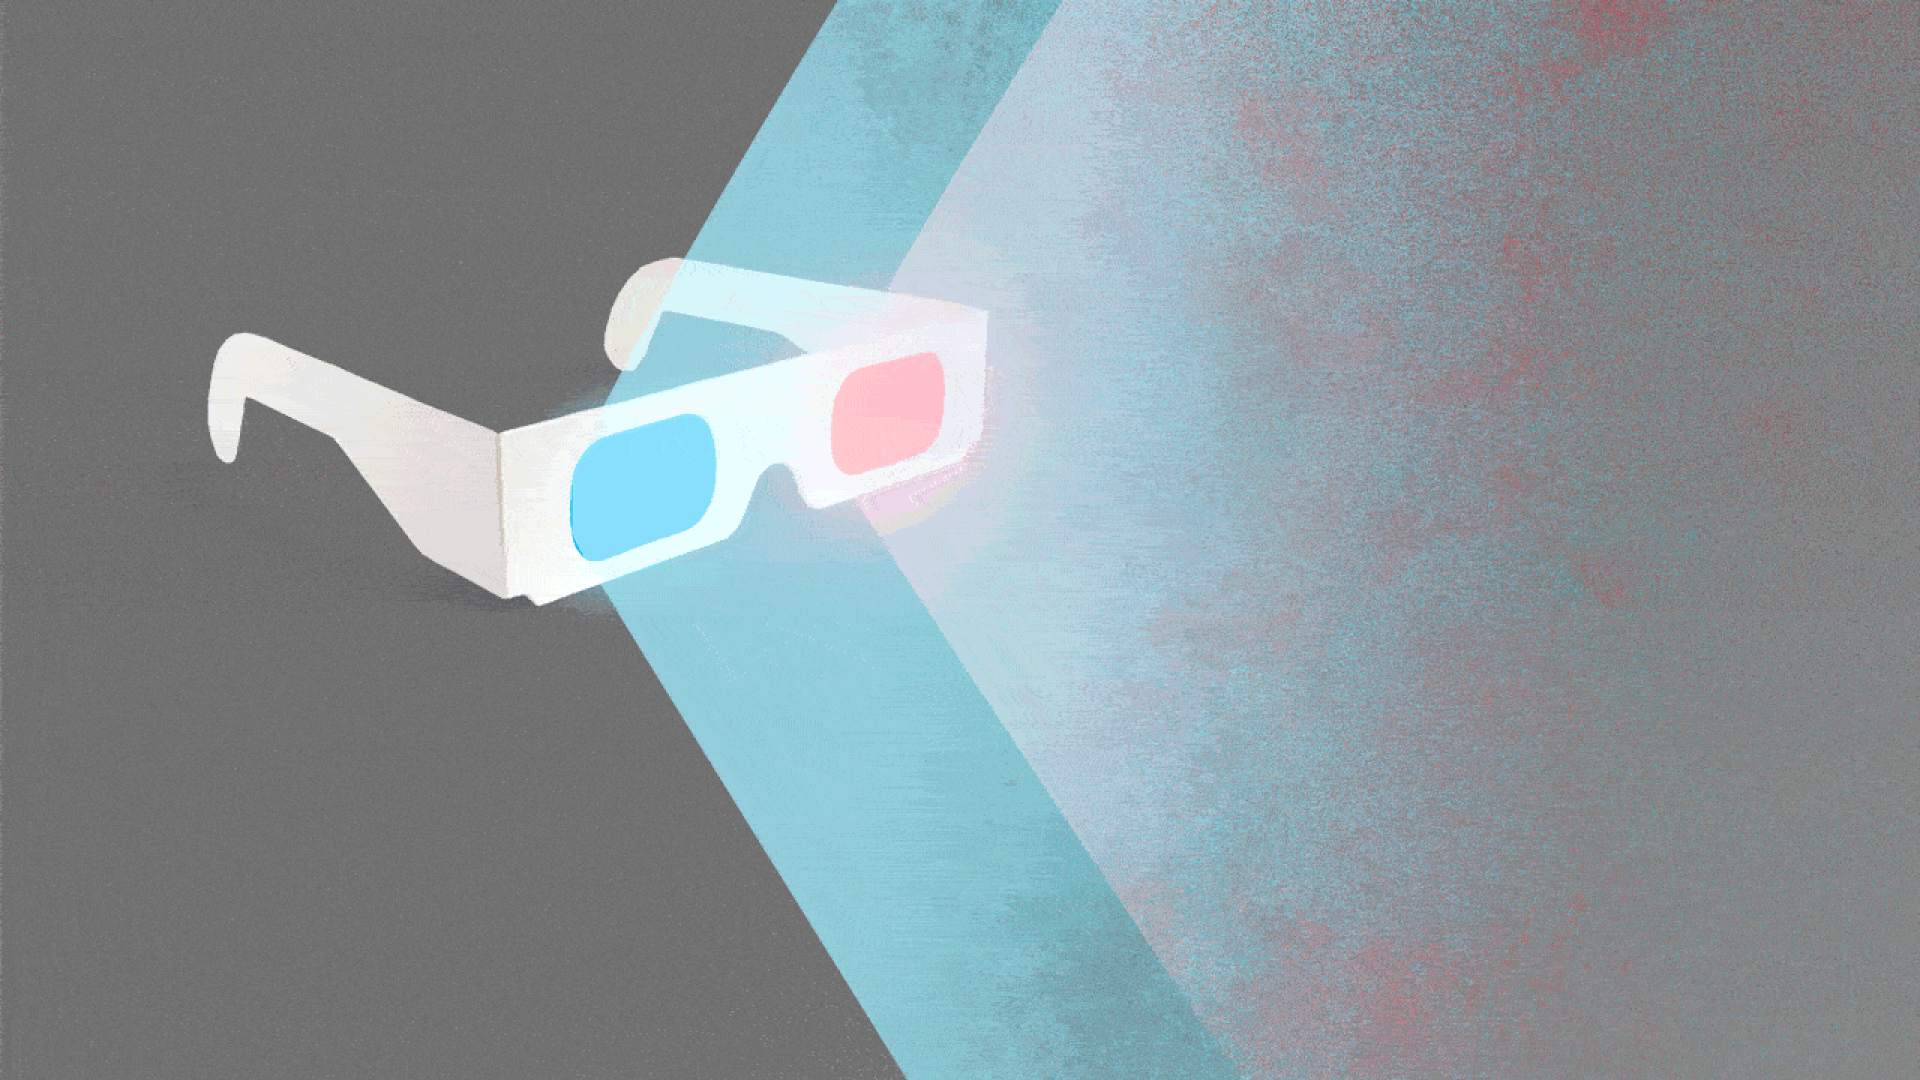 Animated illustration of 3D glasses projecting light. 